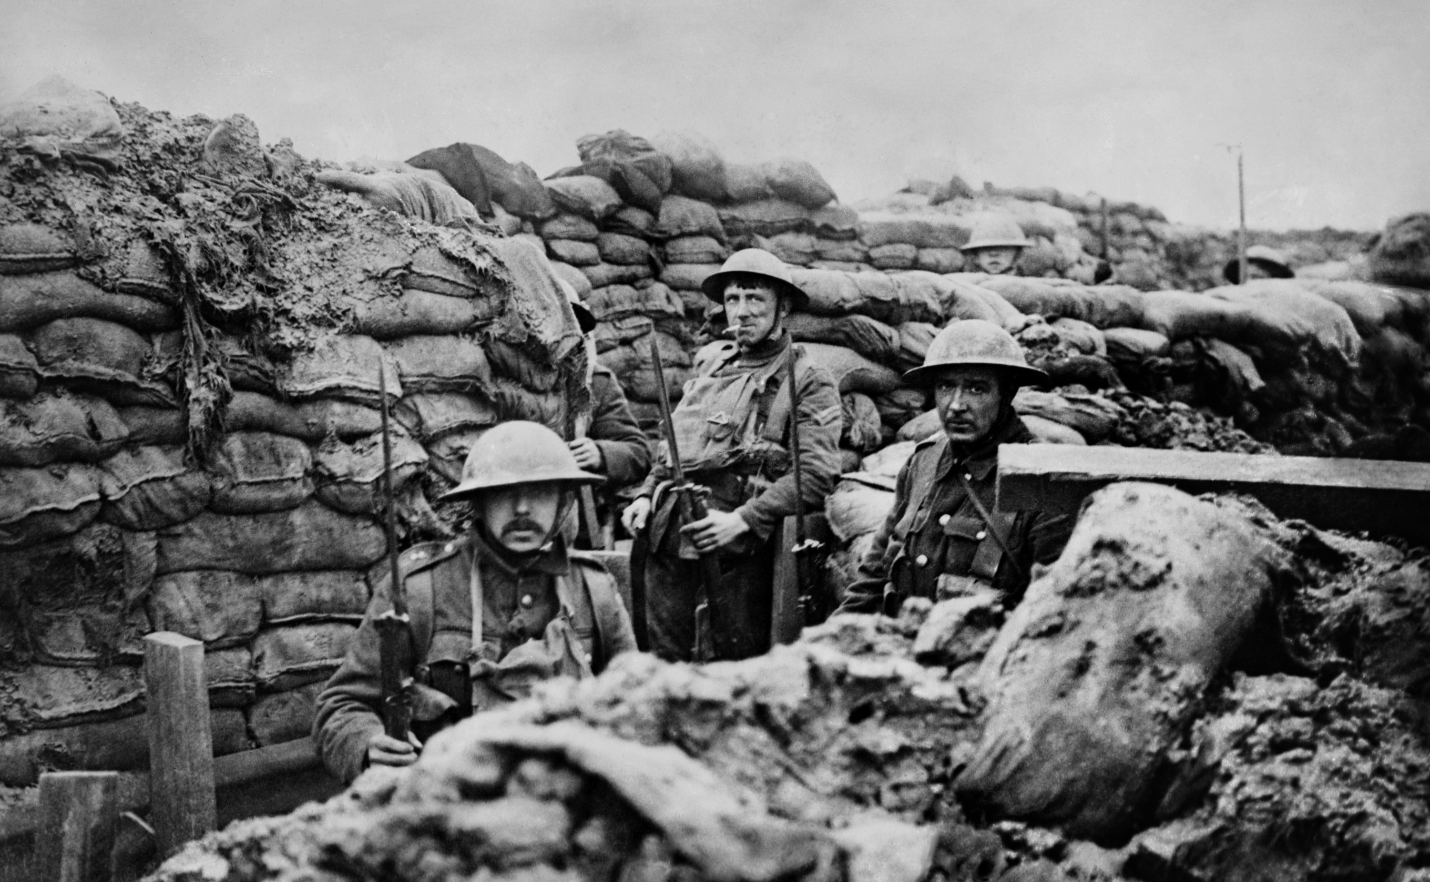 Soldiers in a trench